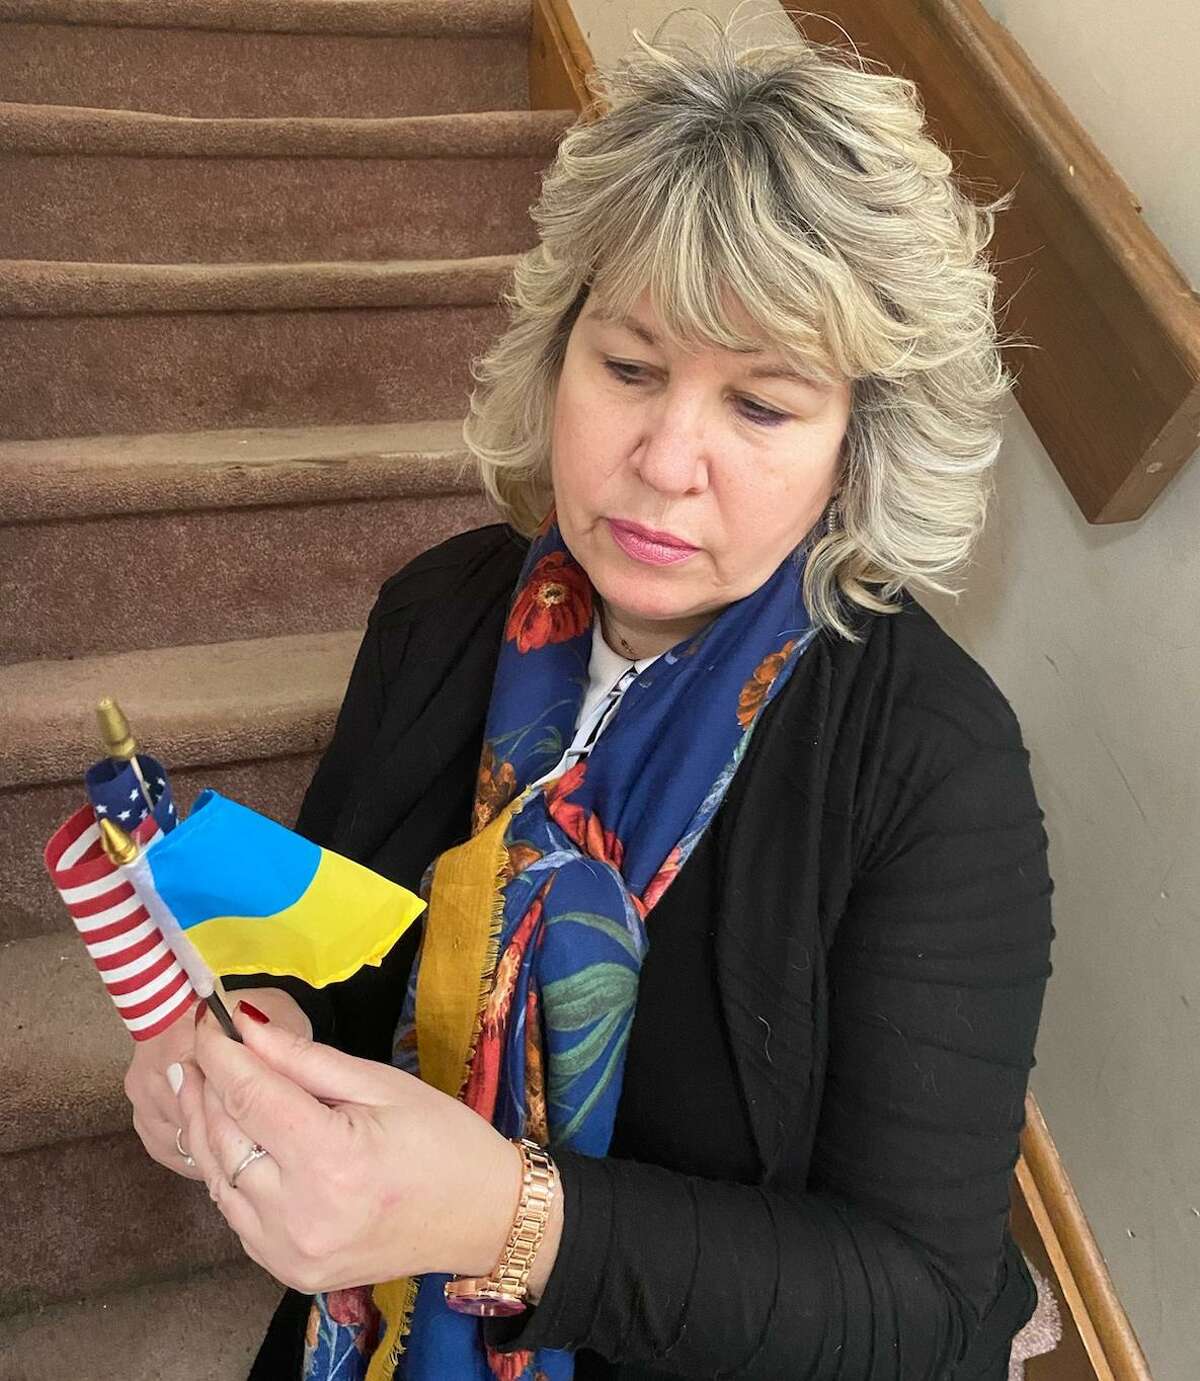 Halia Lodynsky of Bethany, a member of Ukrainian Congress Committee of America, and an activist who decries Russia’s military movement into Ukraine.